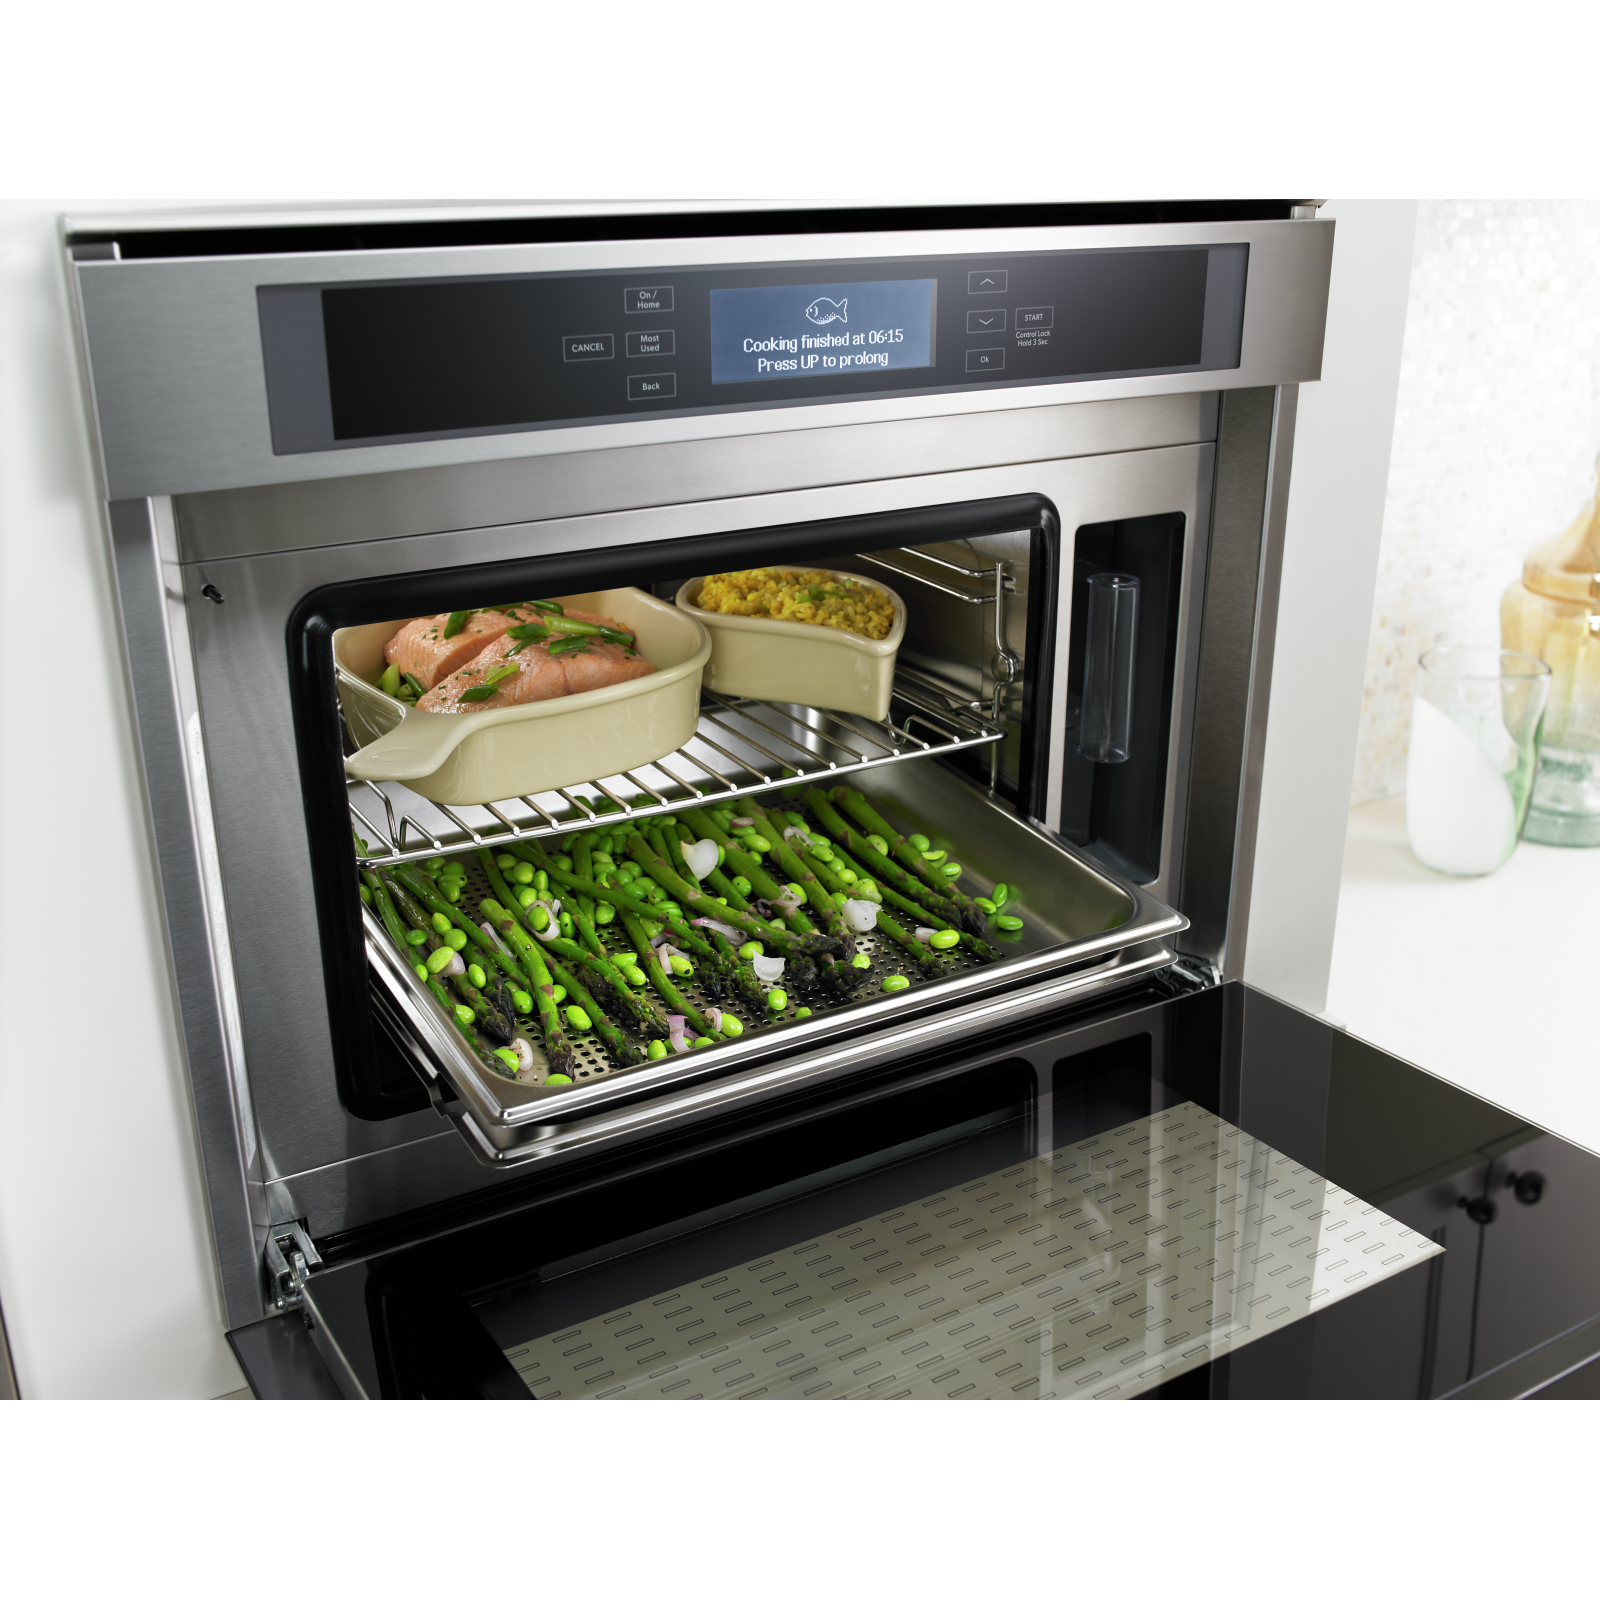 JennAir - 1.3 cu. ft Steam Wall Oven in Stainless - JBS7524BS